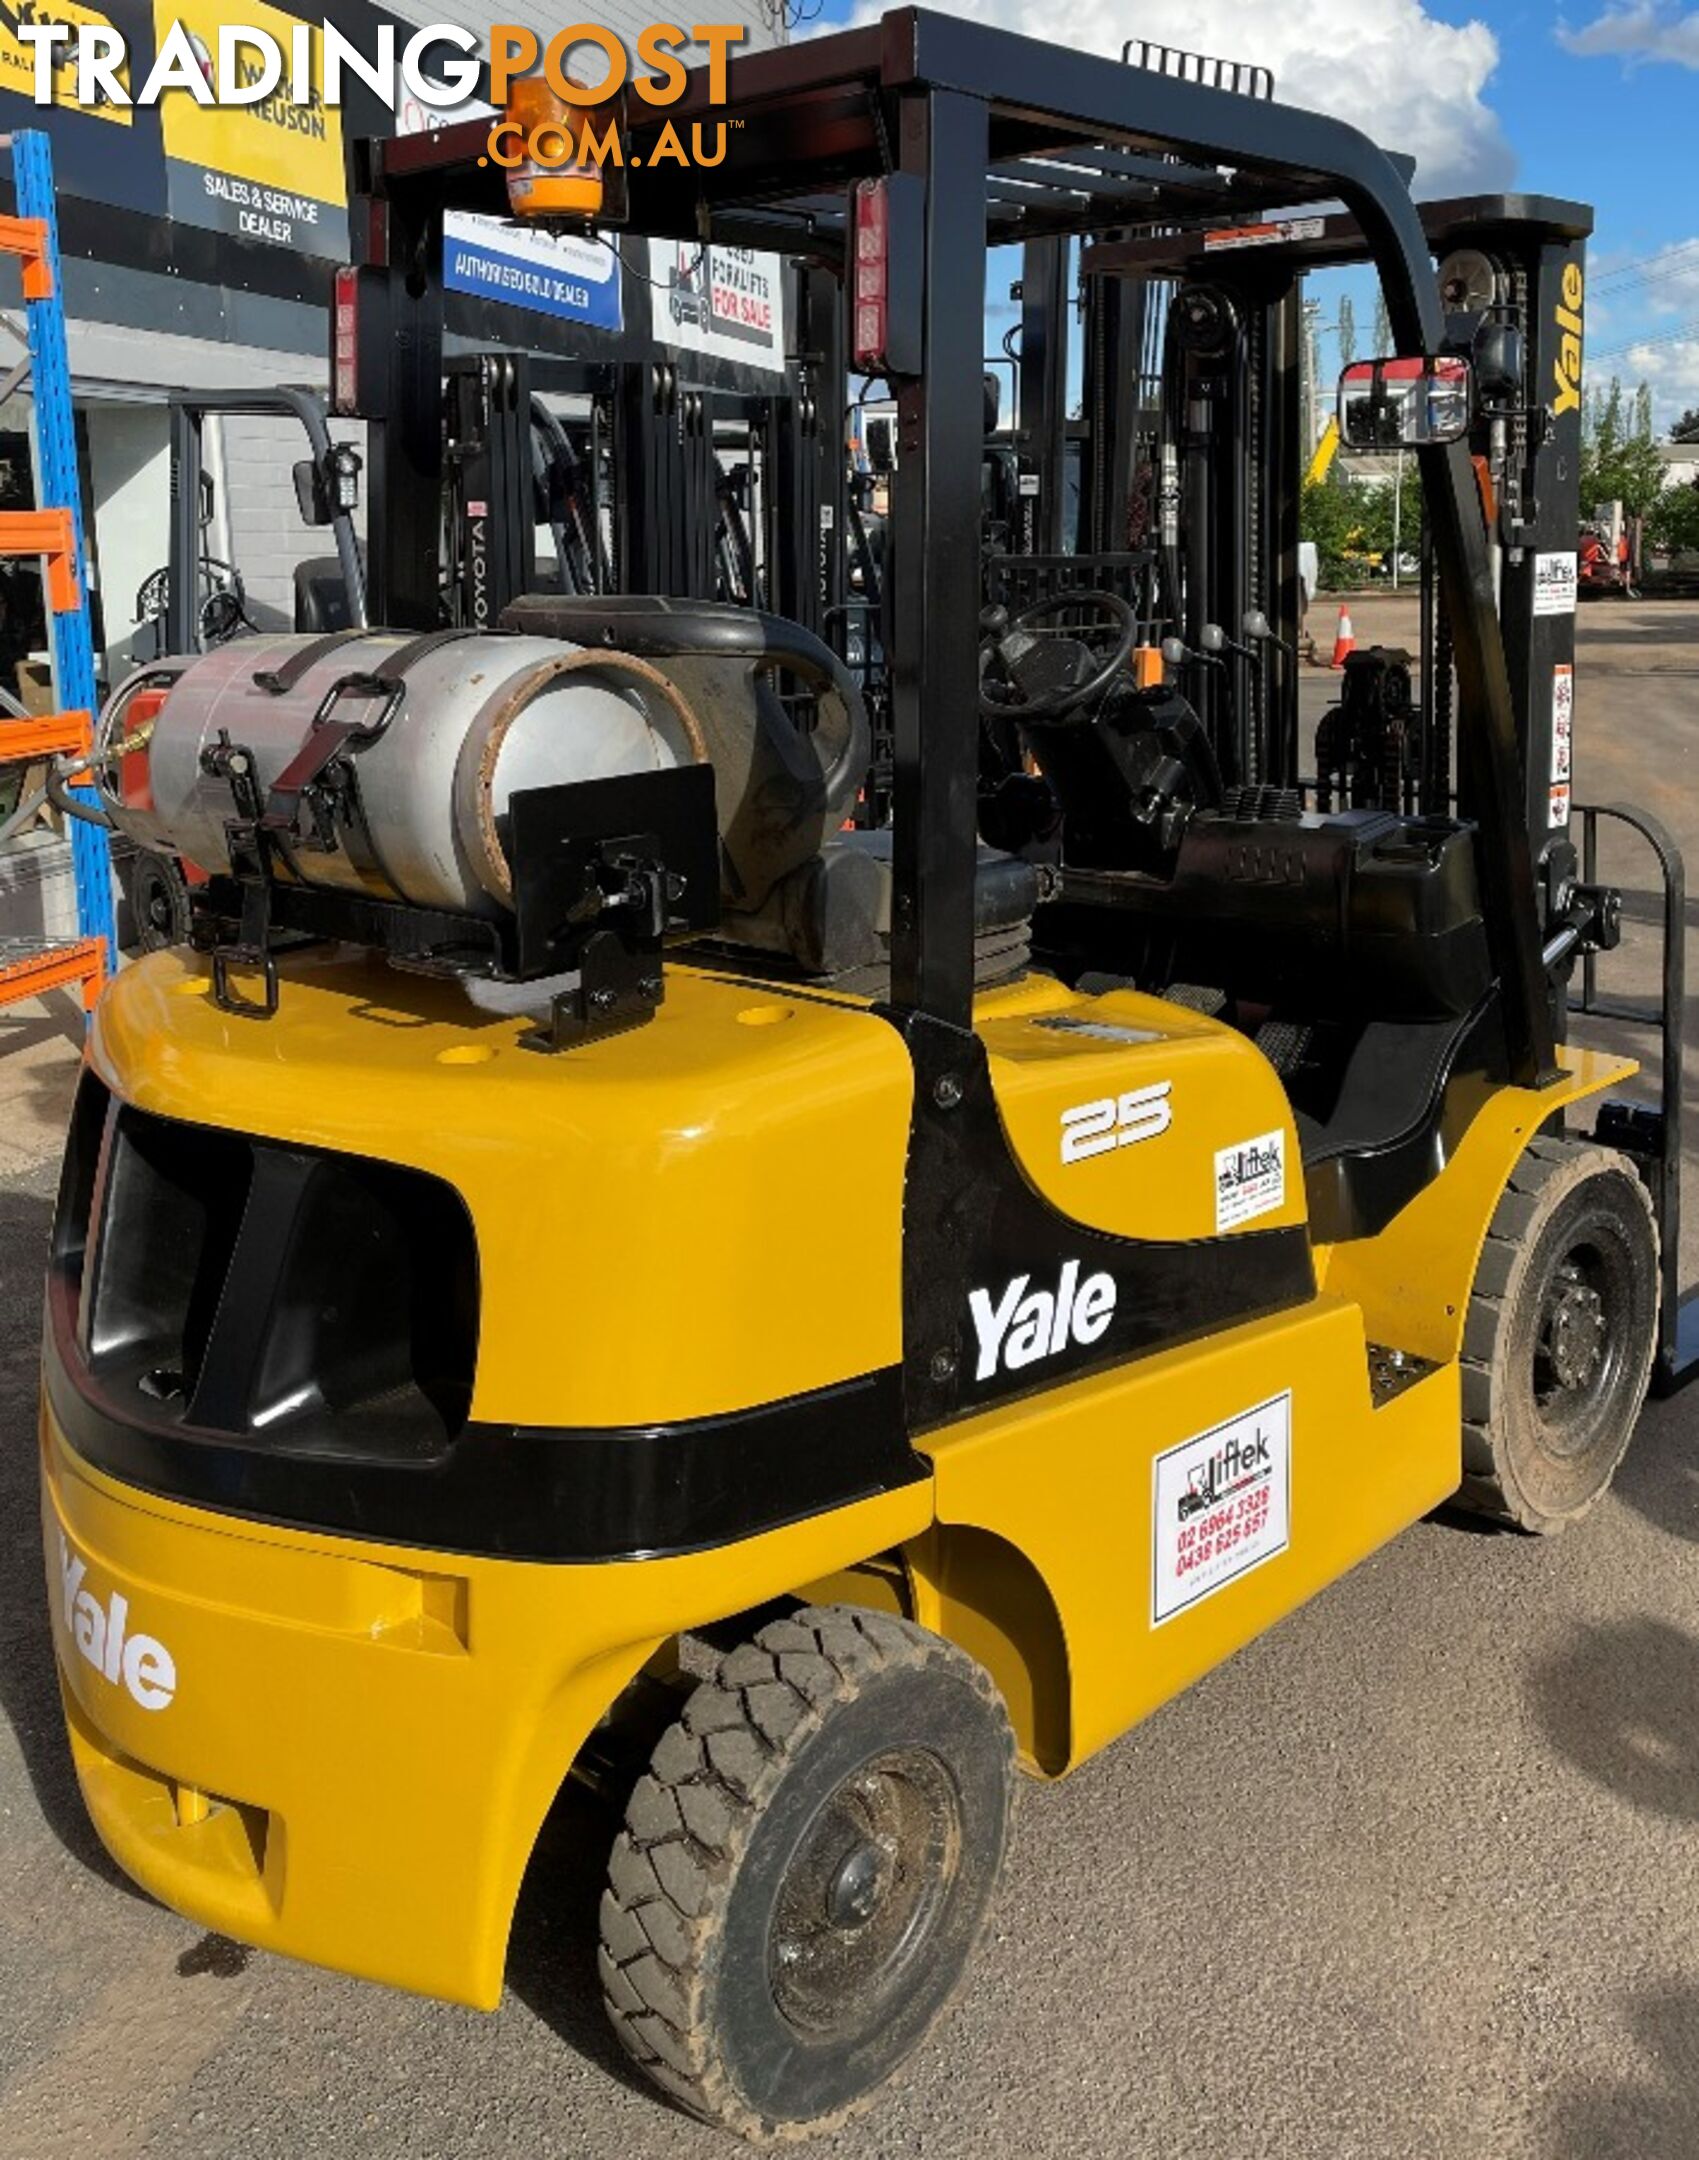 Used Yale 2.5TON Forklift For Sale